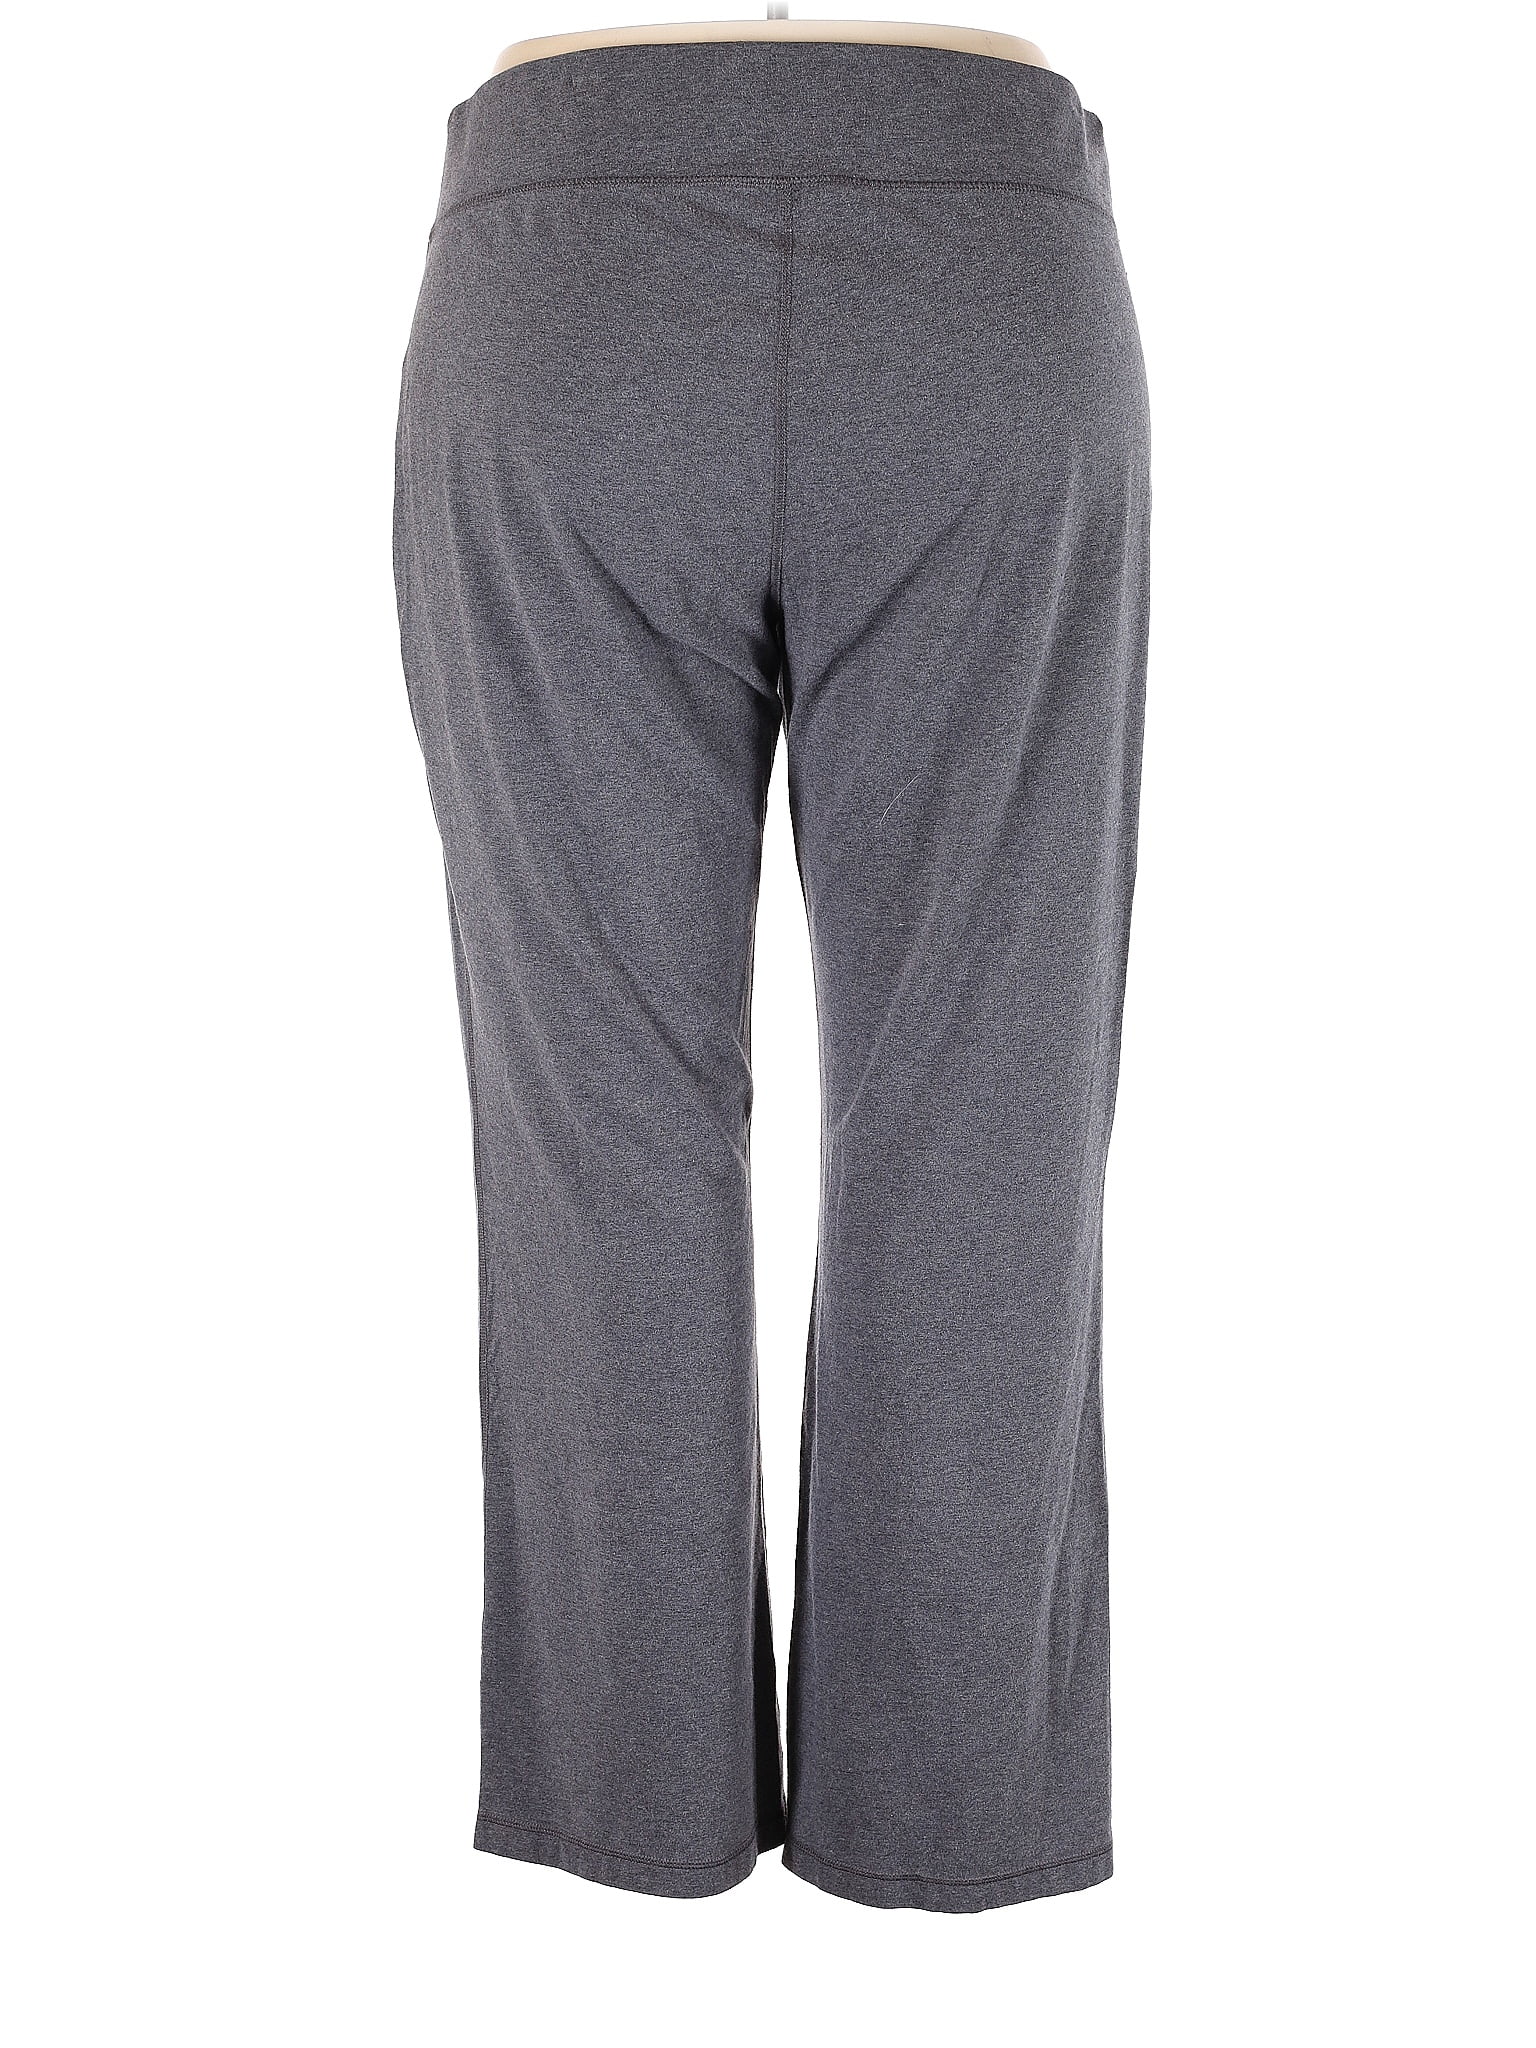 Danskin Now Marled Gray Active Pants Size 3X (Plus) - 5% off